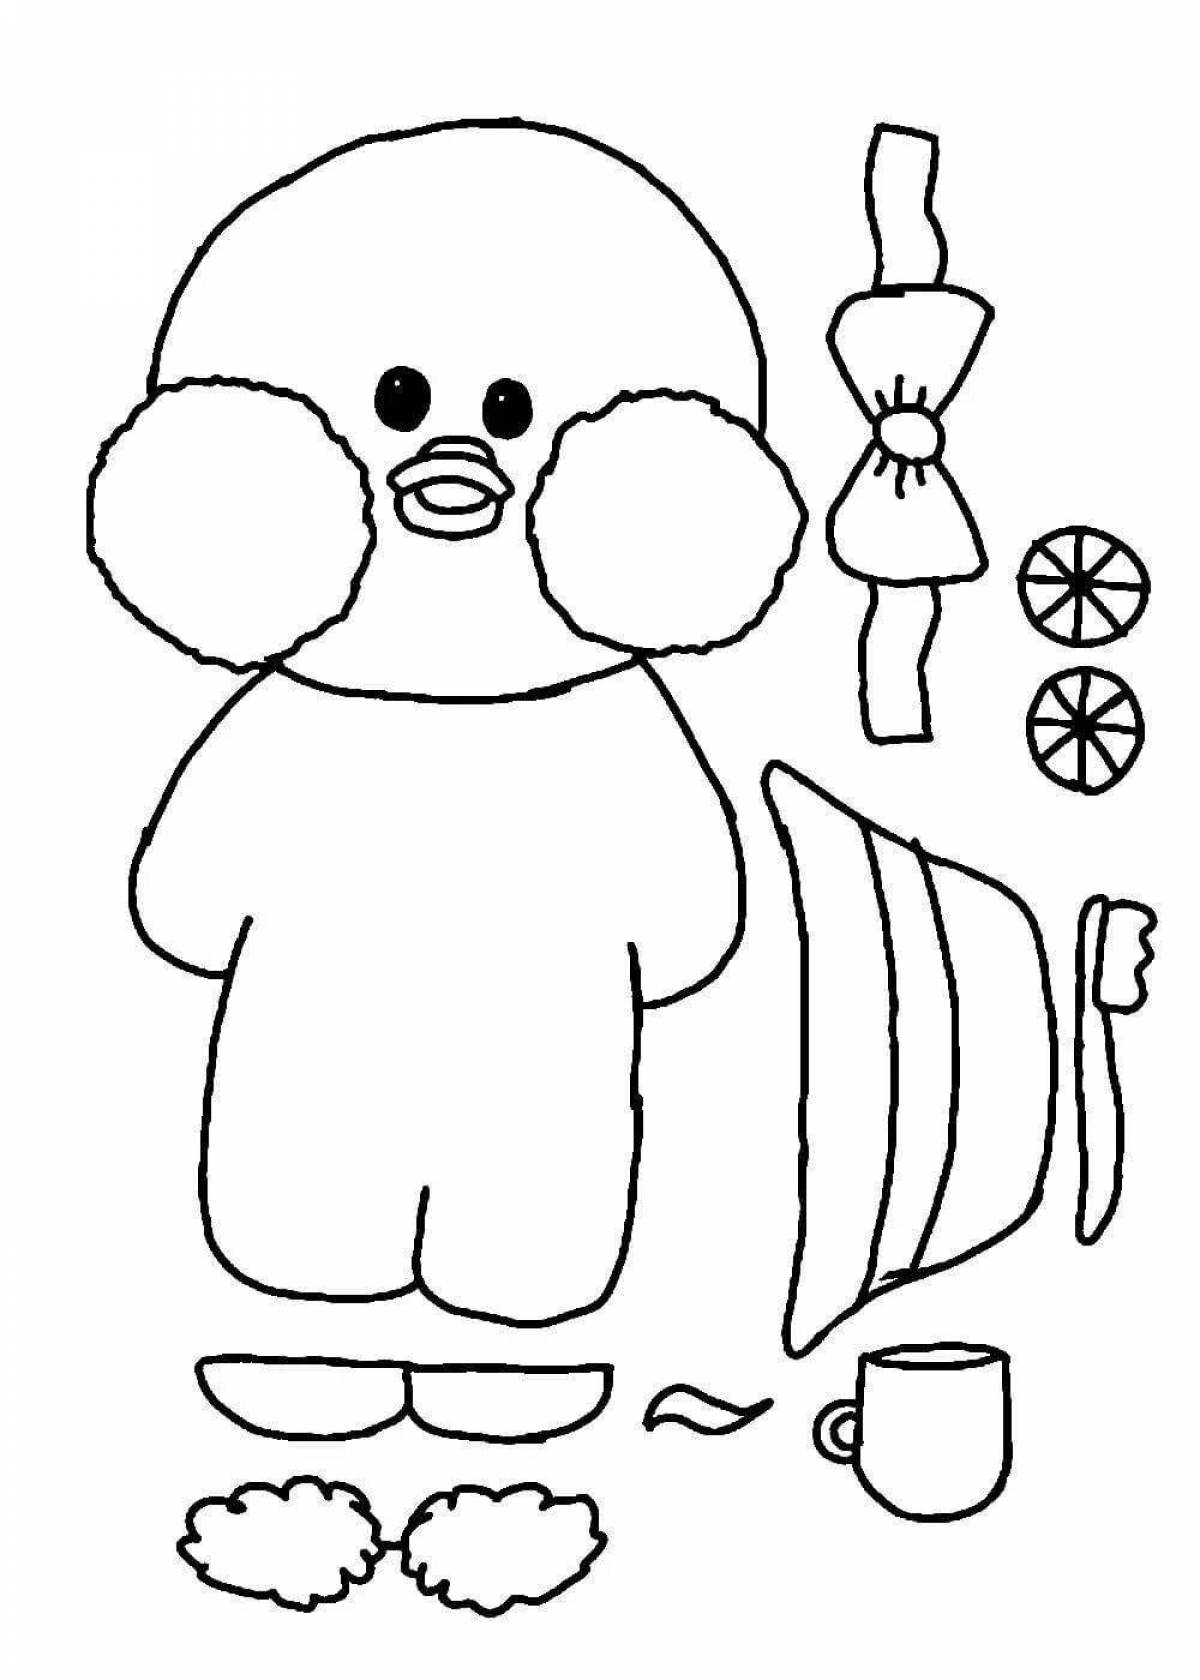 Alan fanfan's amazing coloring page